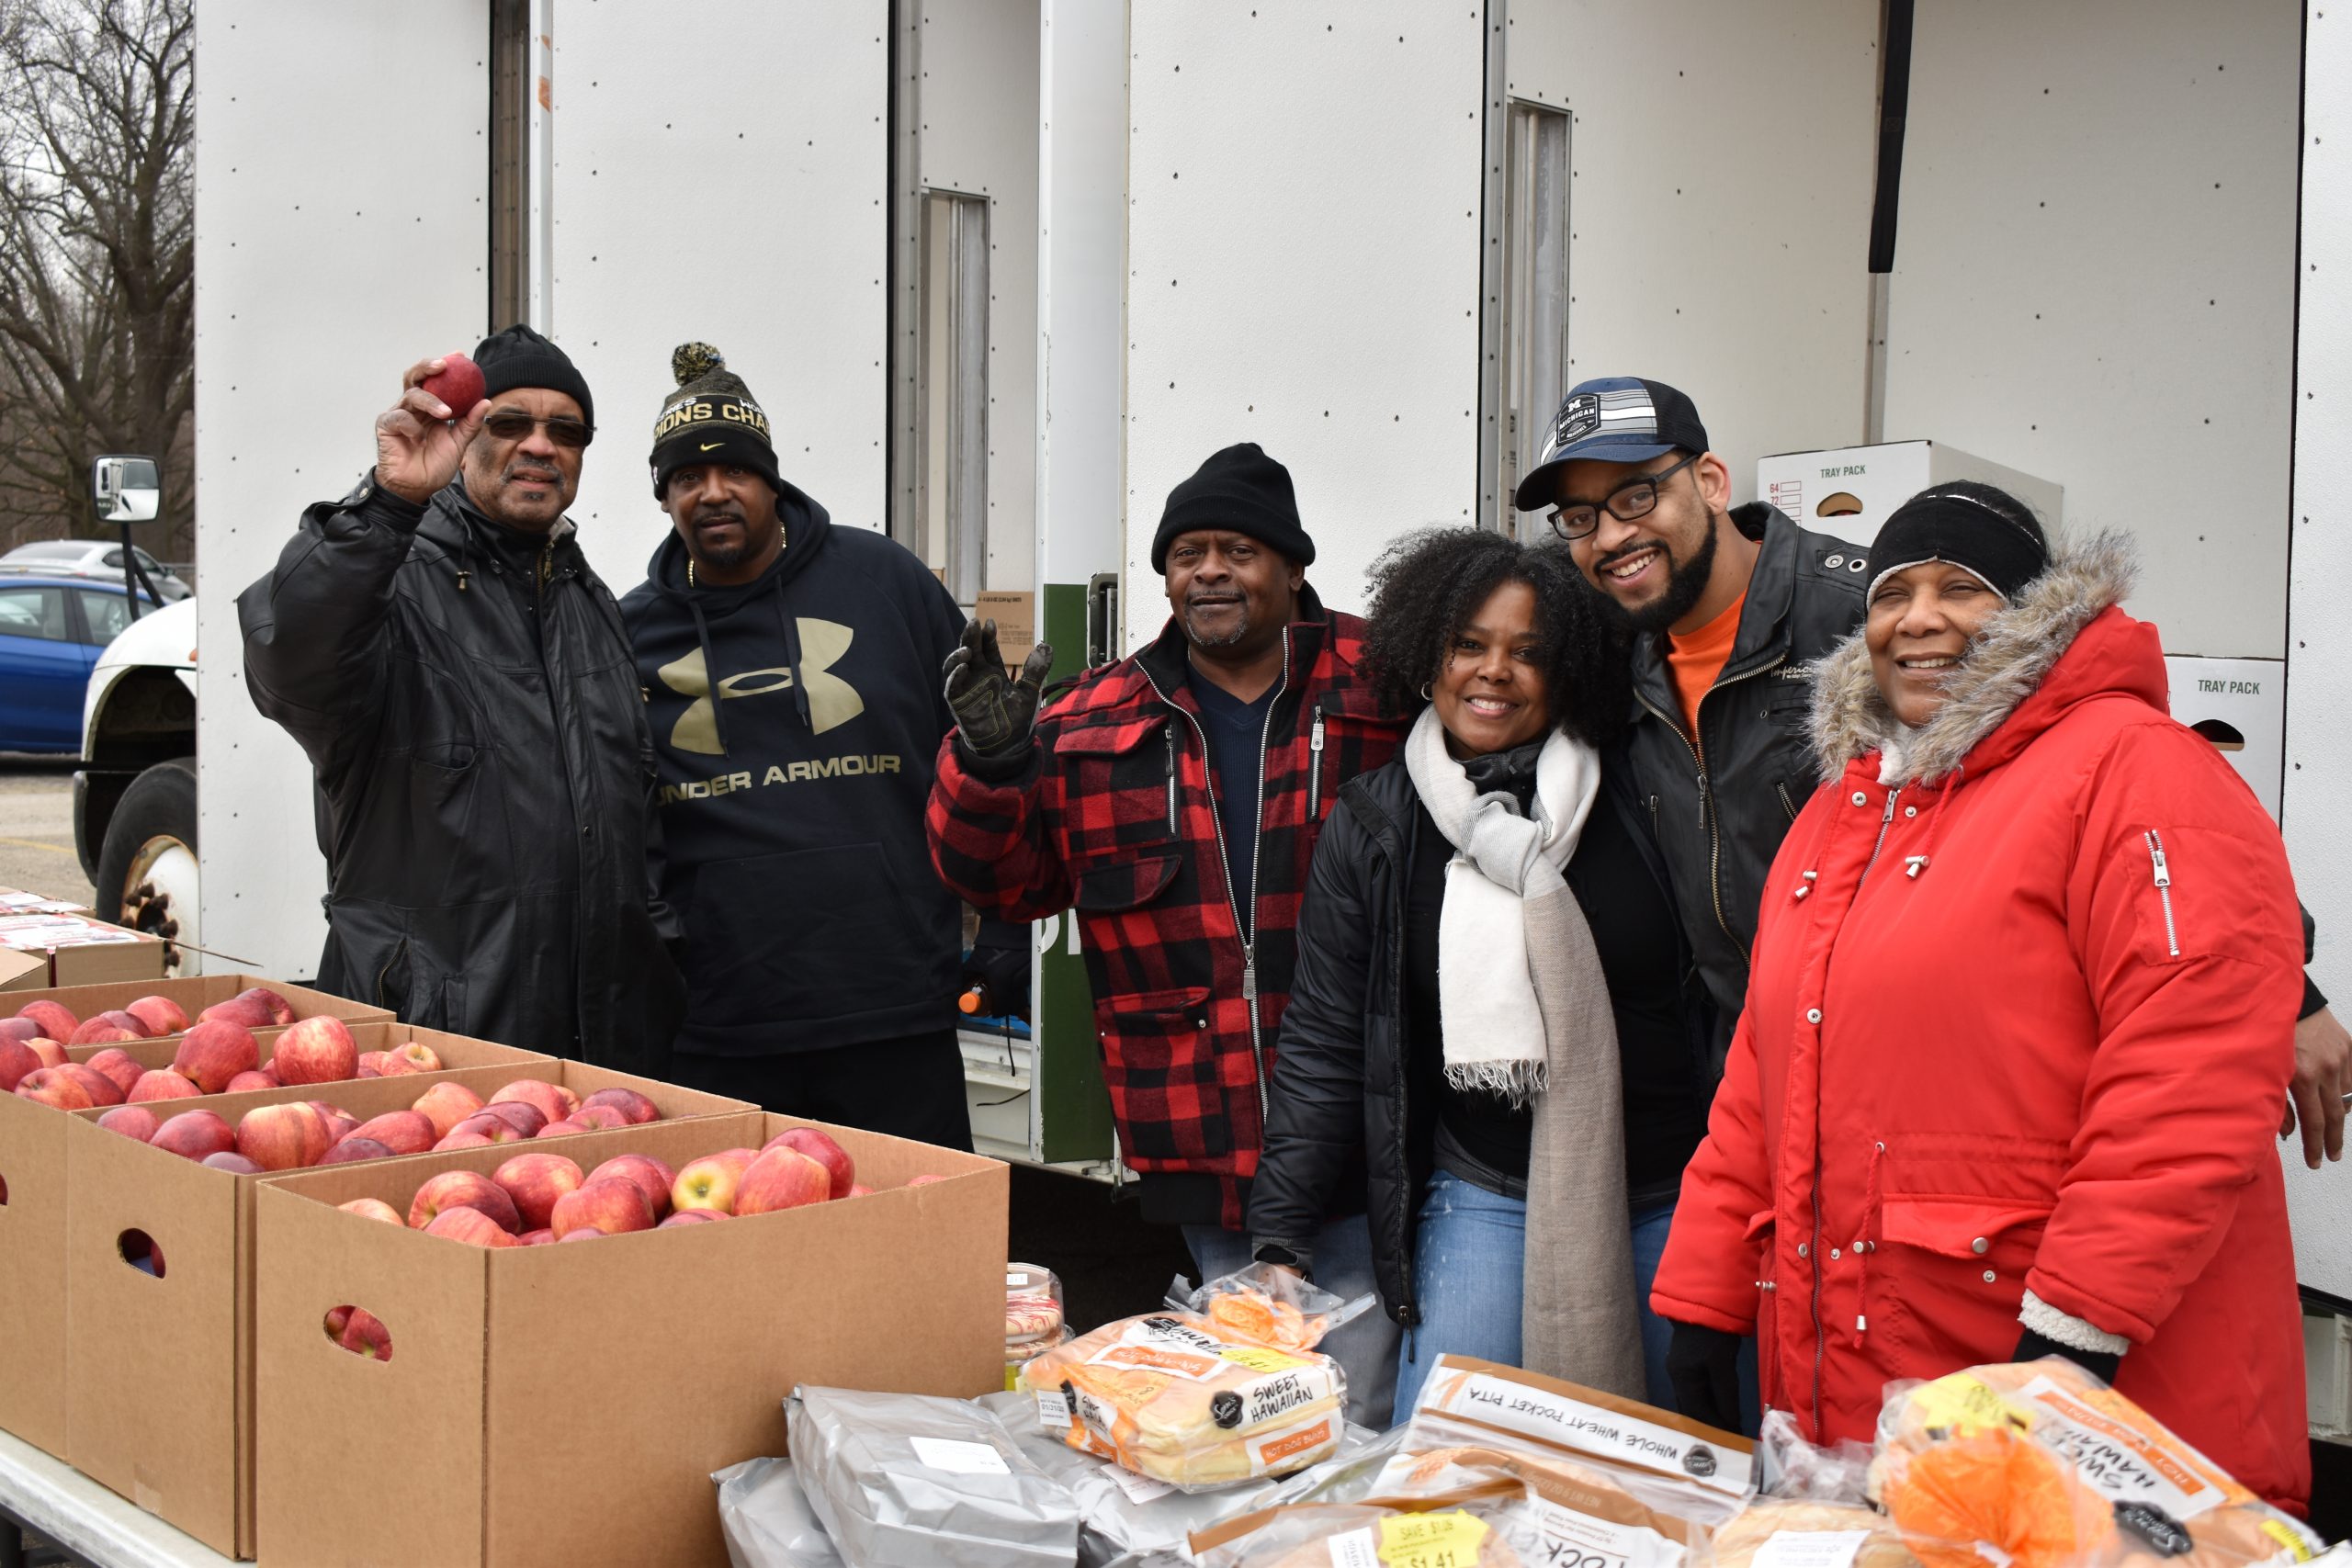 Group of volunteers poses with food and smiles at camera